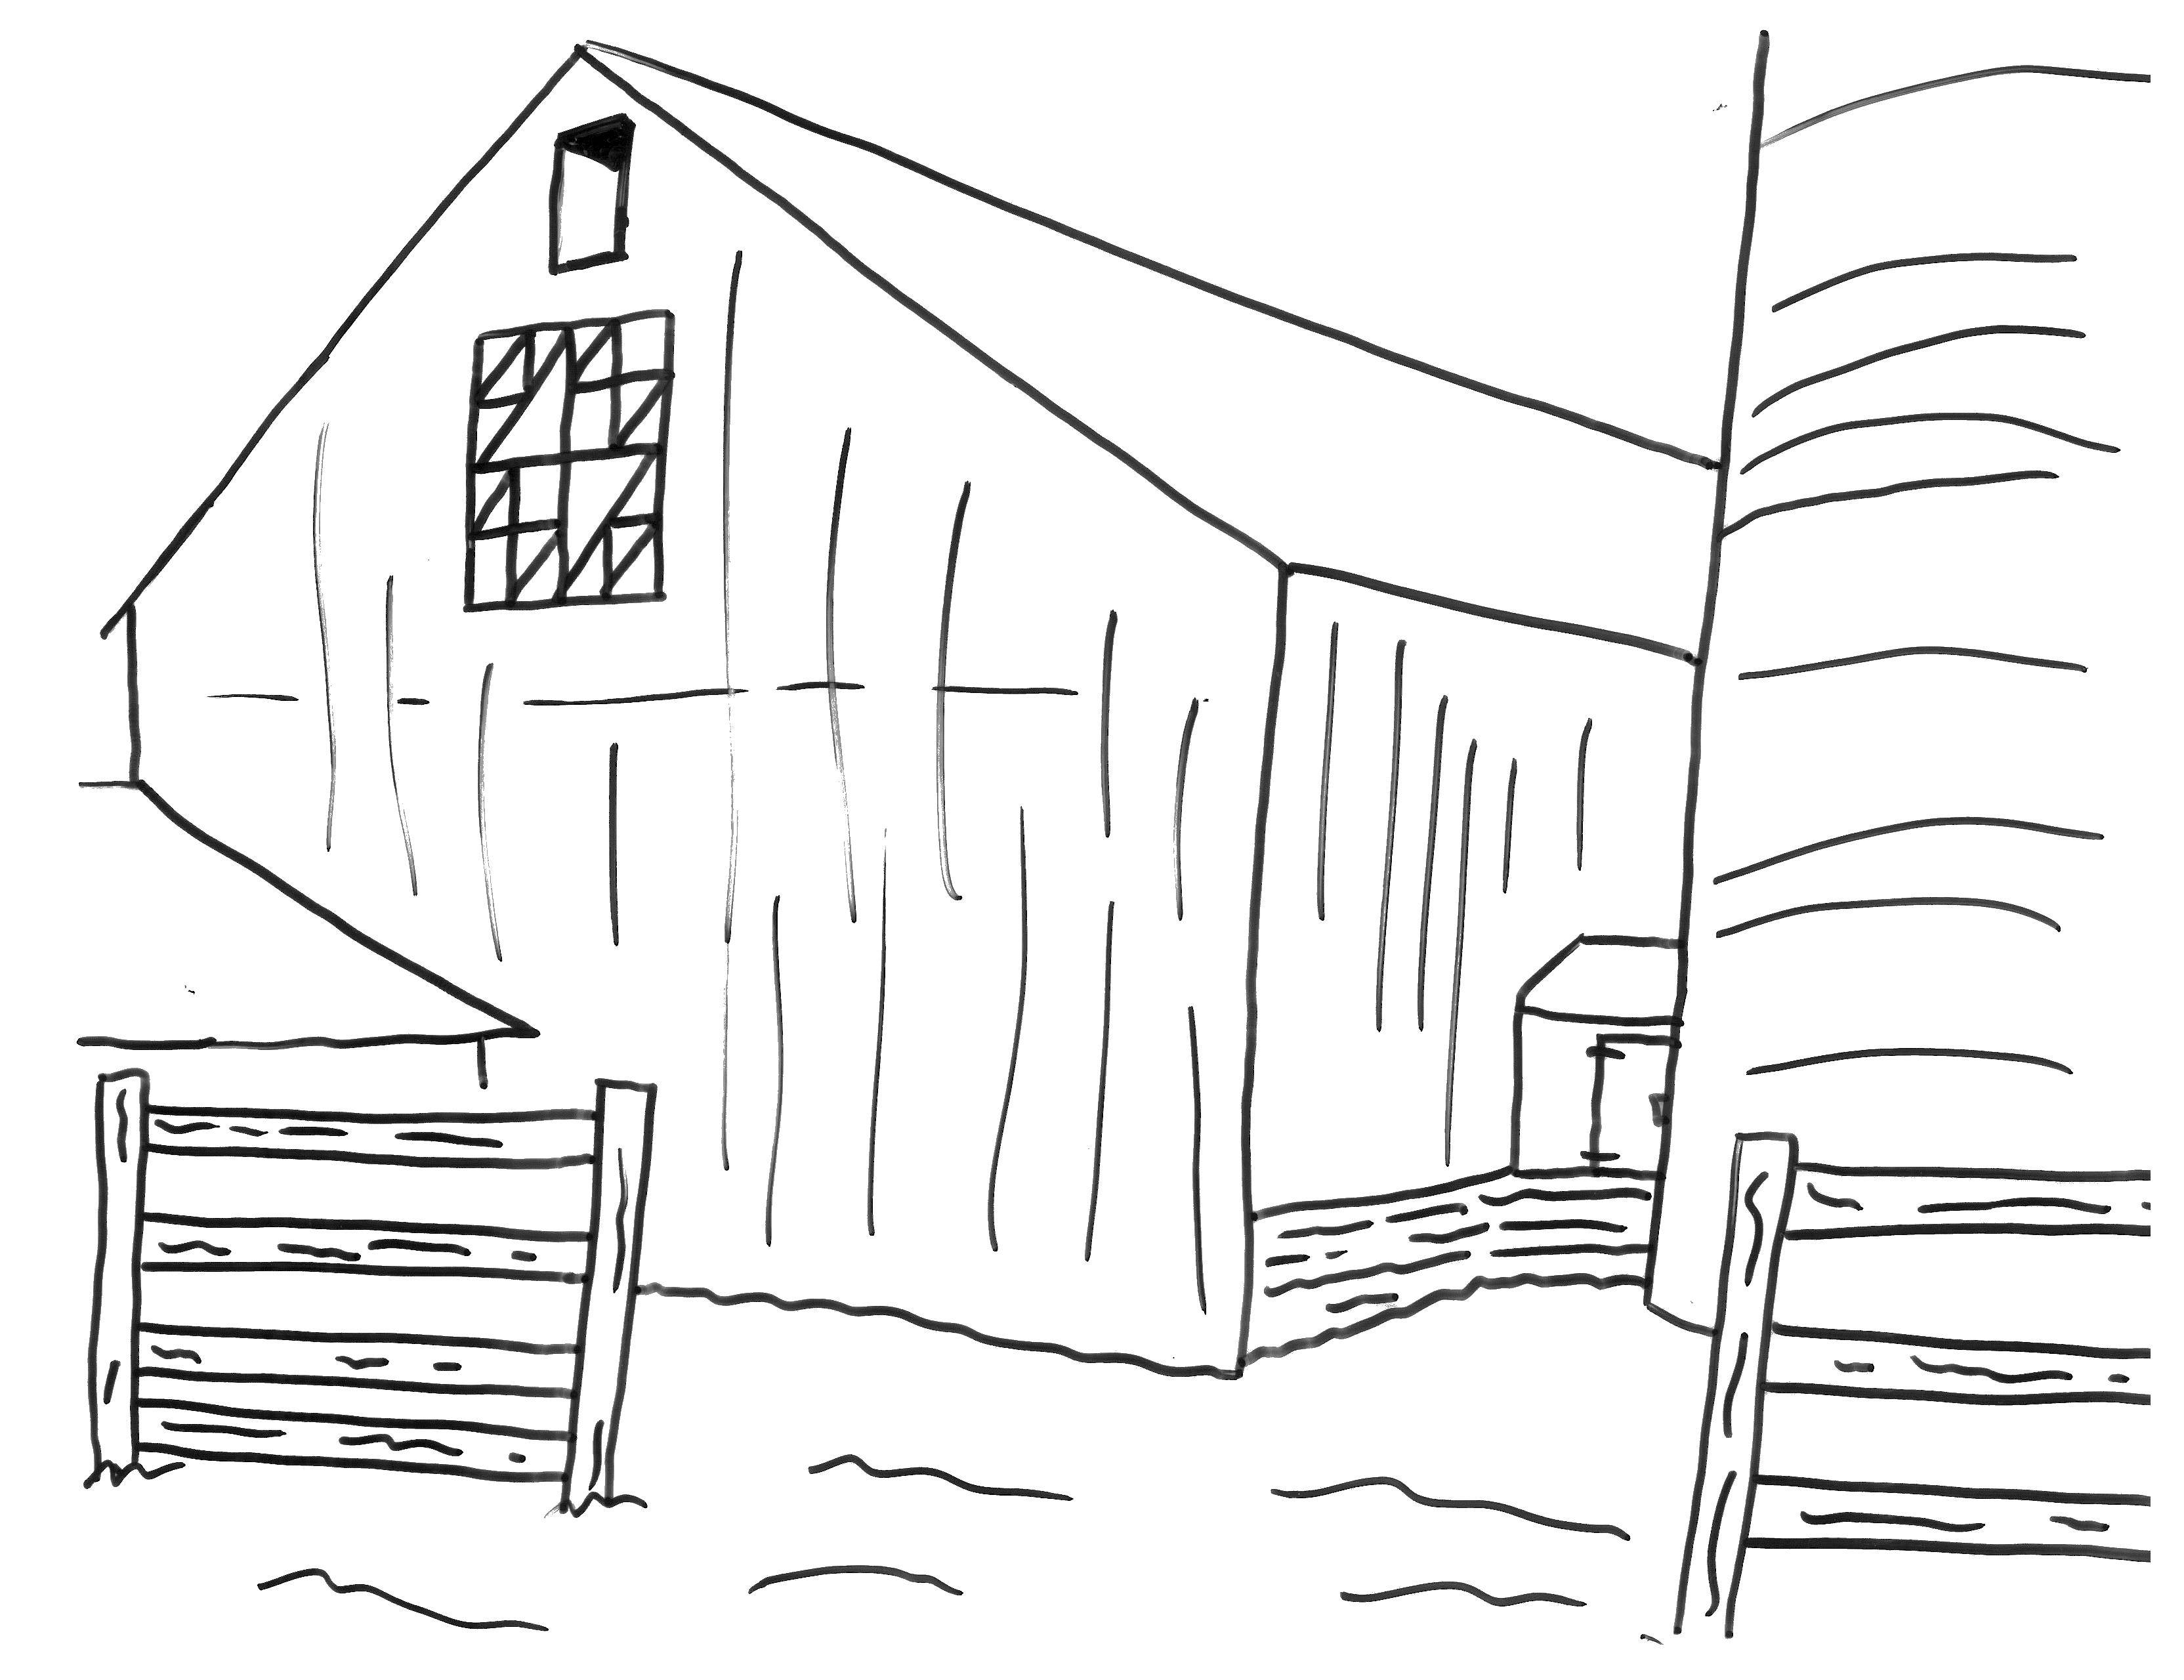 Coloring The barn. Category building. Tags:  barn, shed, buildings.